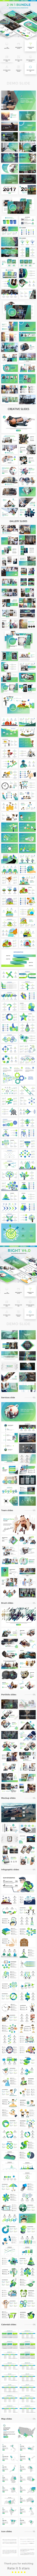 GraphicRiver 2 in 1 Bundle Business Powerpoint Template 21110106